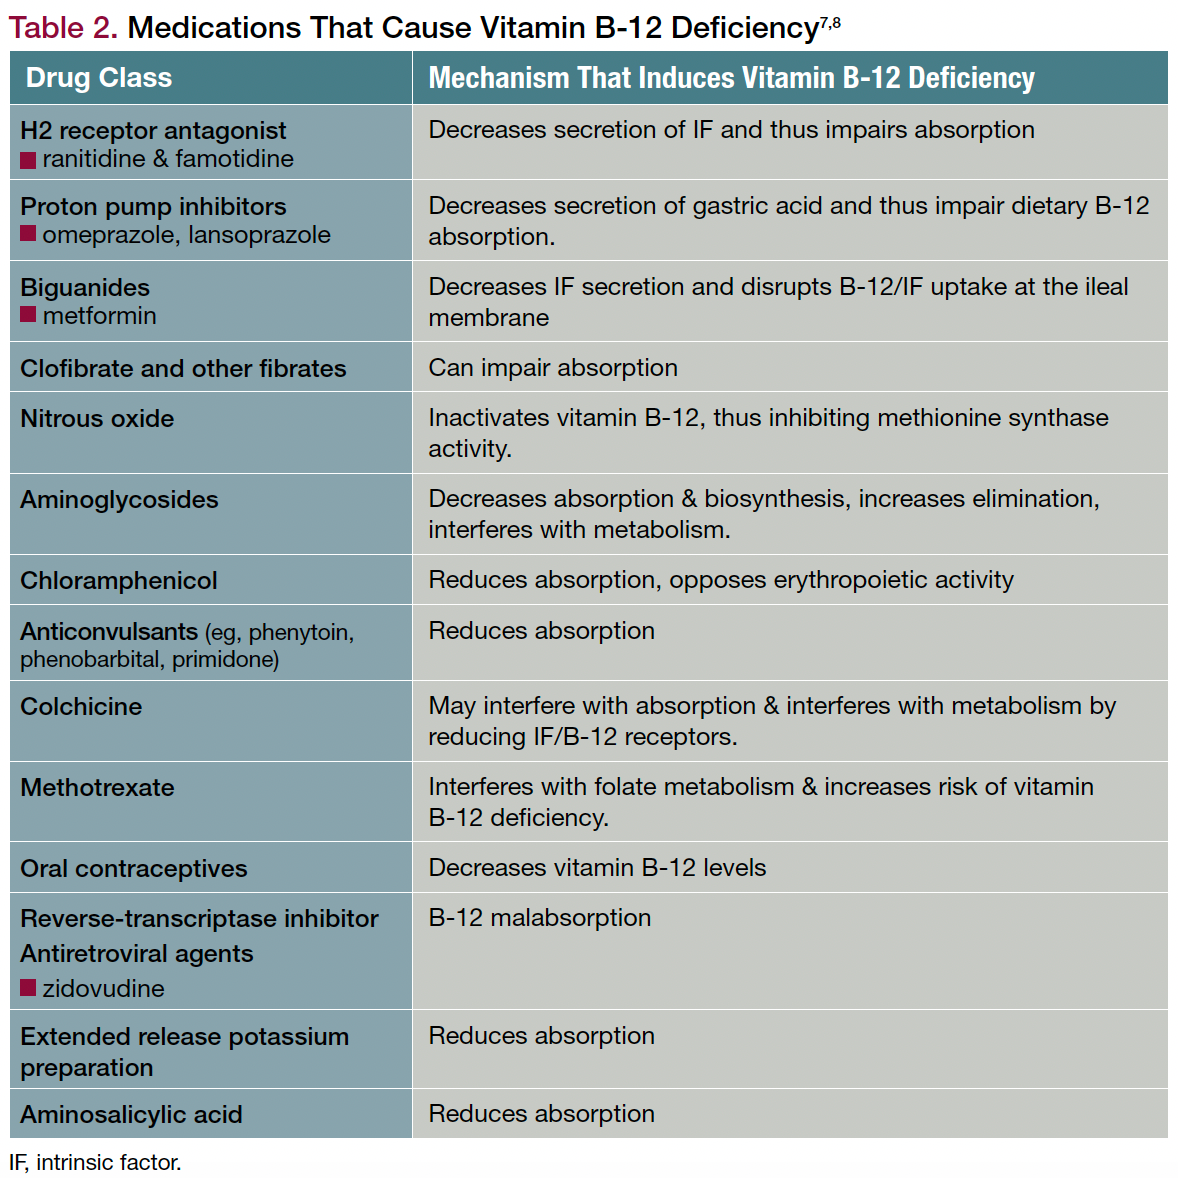 Table 2. Medications That Cause Vitamin B-12 Deficiency